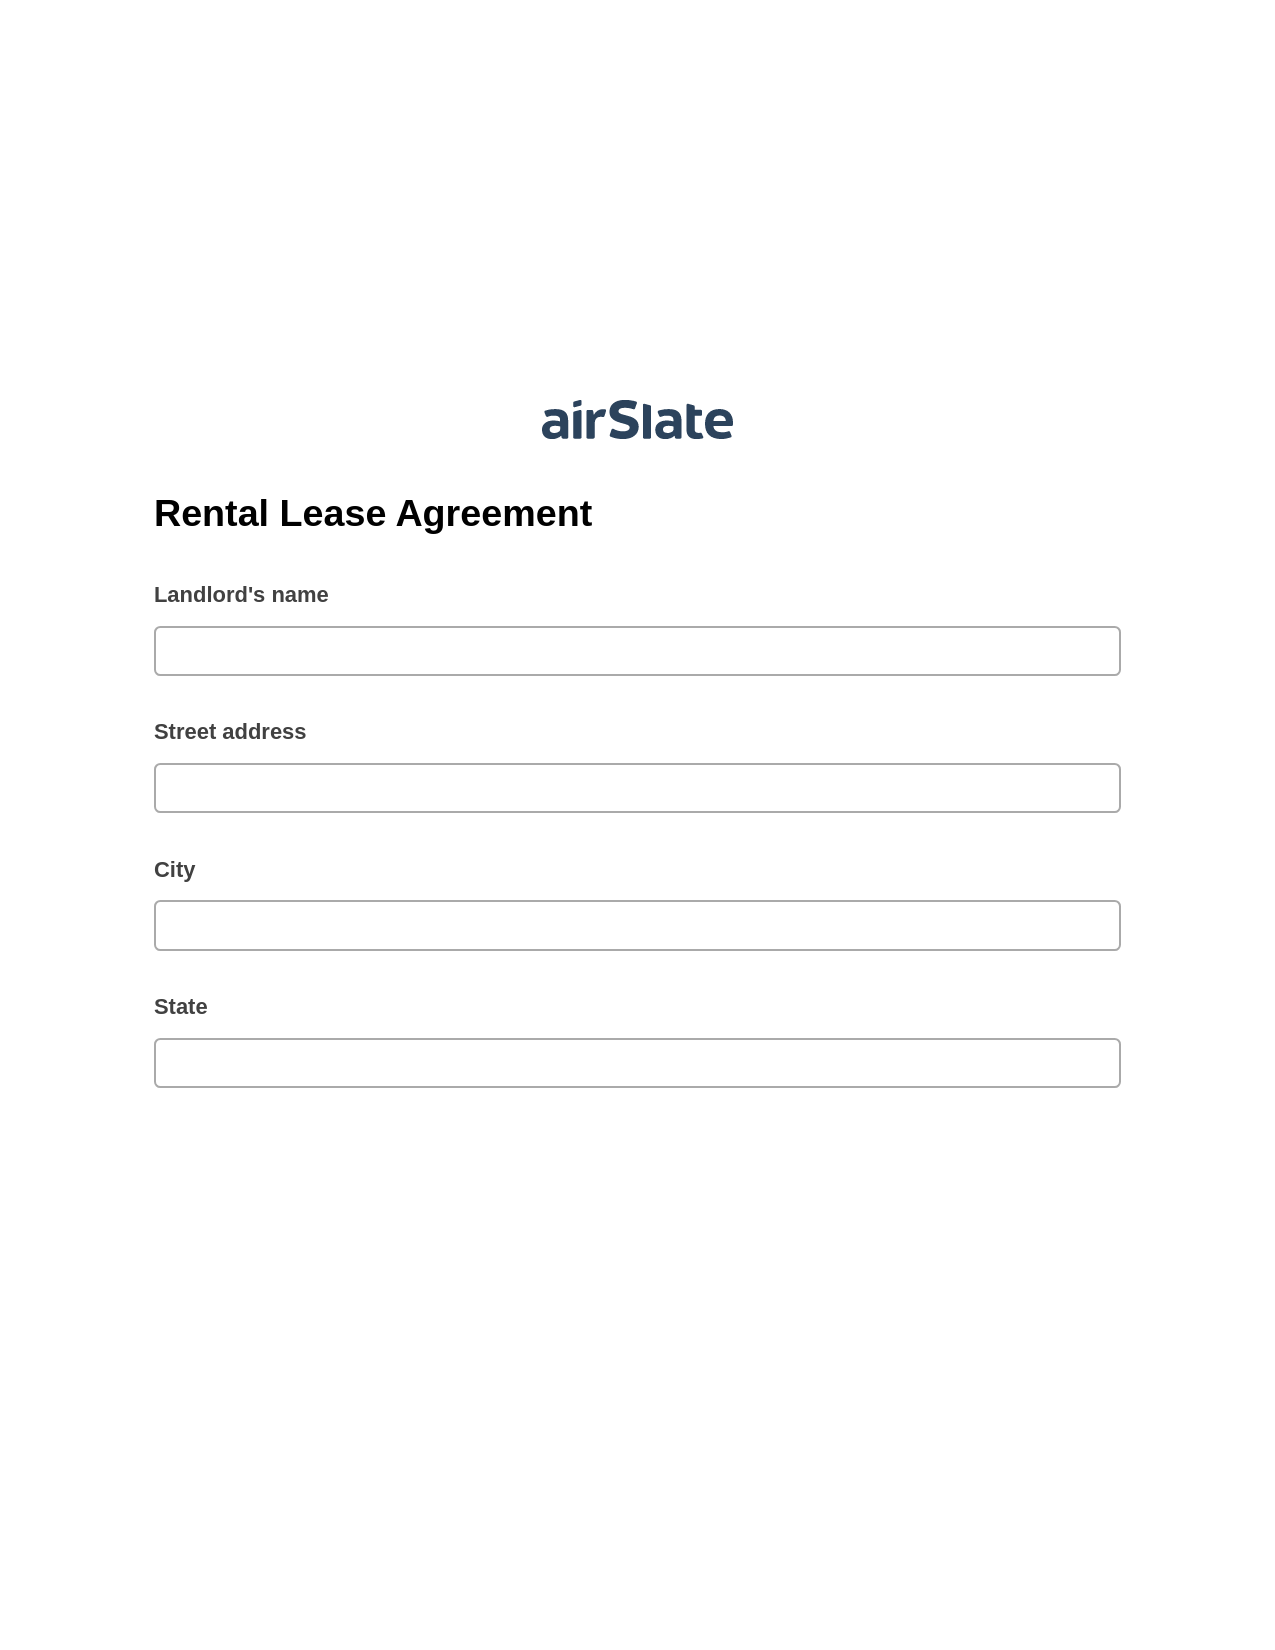 Rental Lease Agreement Pre-fill from CSV File Bot, Roles Reminder Bot, Export to Smartsheet